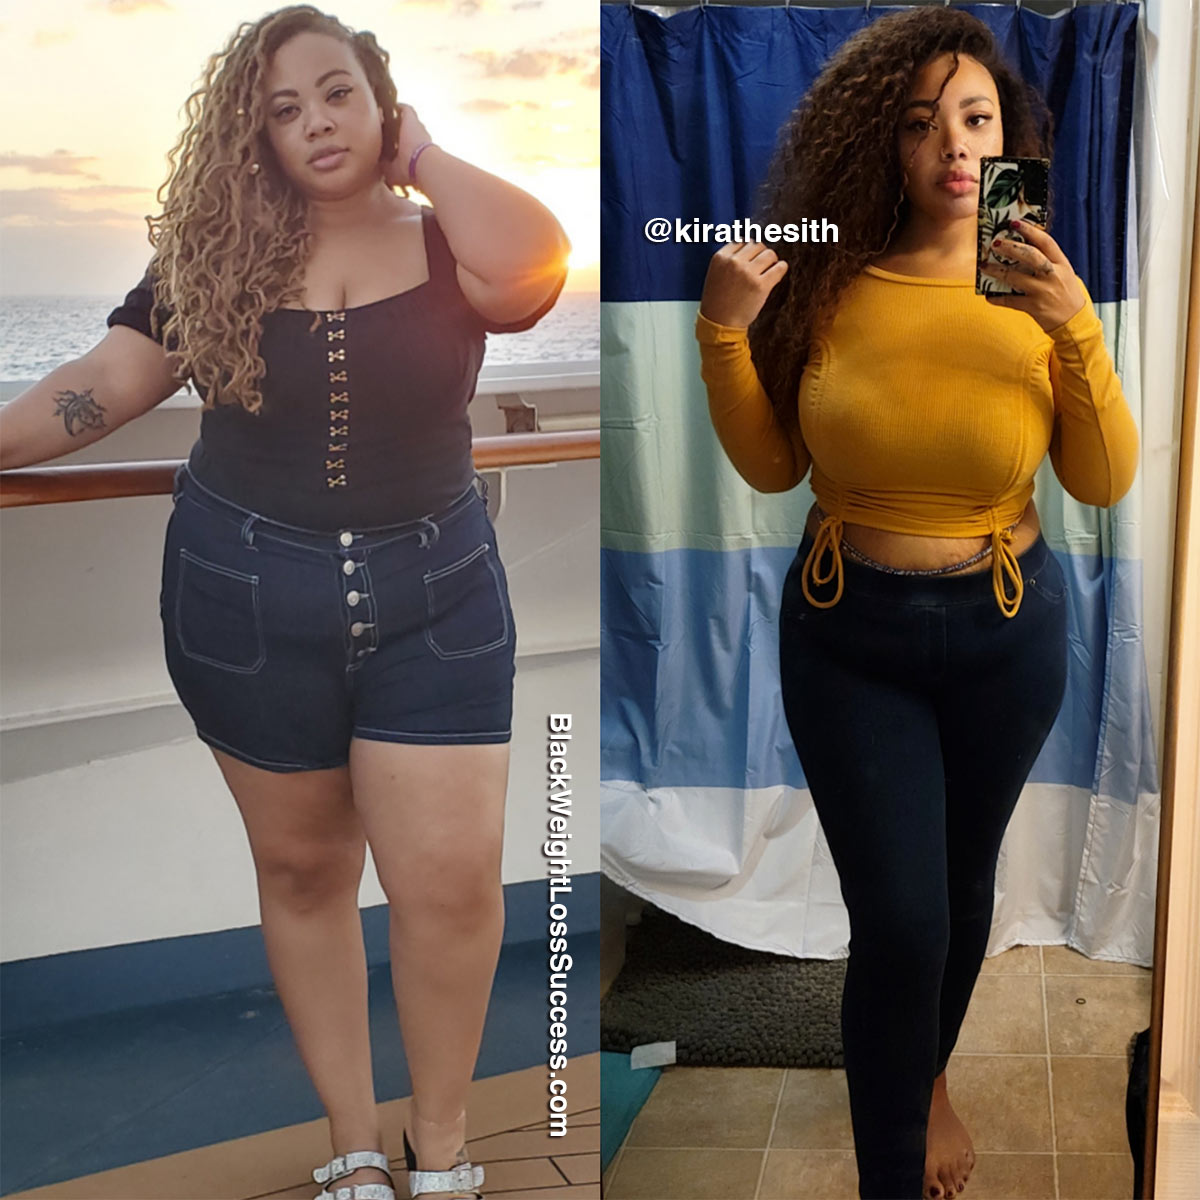 Kira before and after losing weight